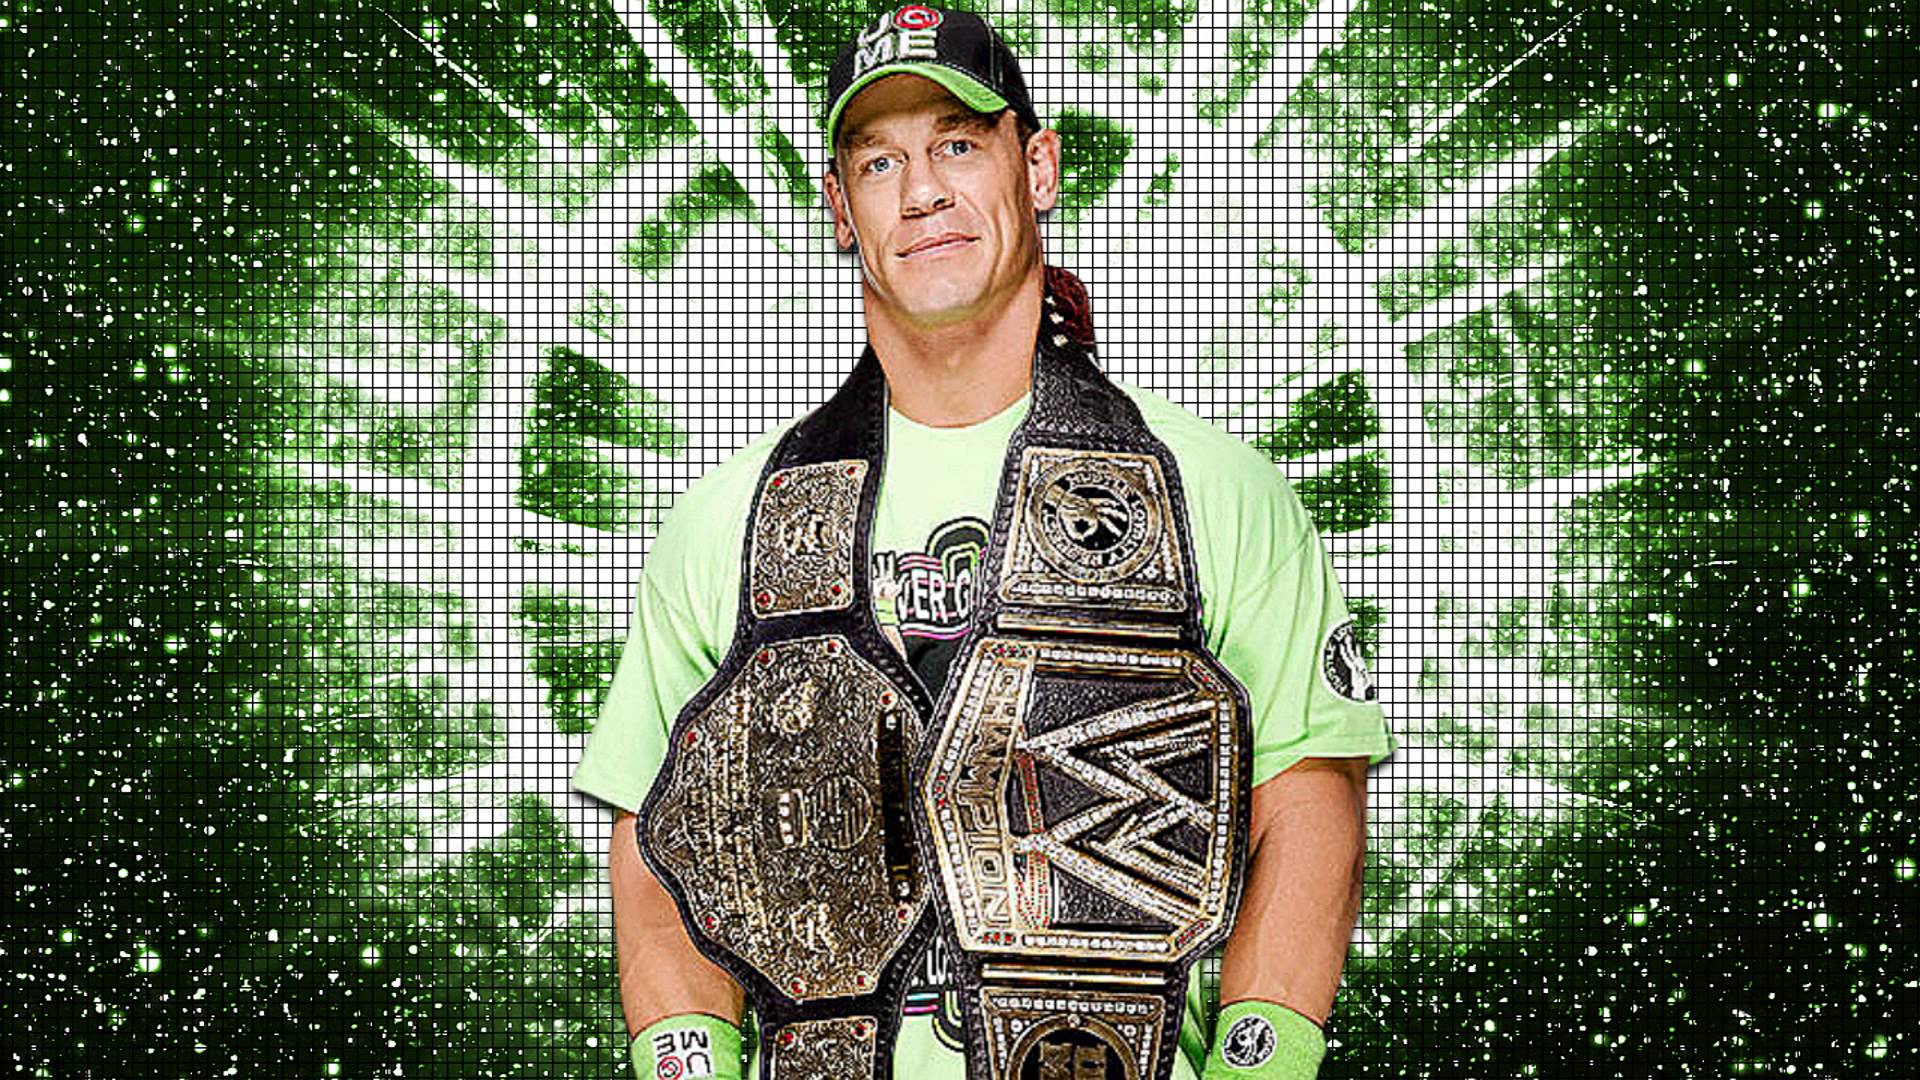 Wwe Super Star John Cena With Belts Free Download Hd Mobile Background Pictures